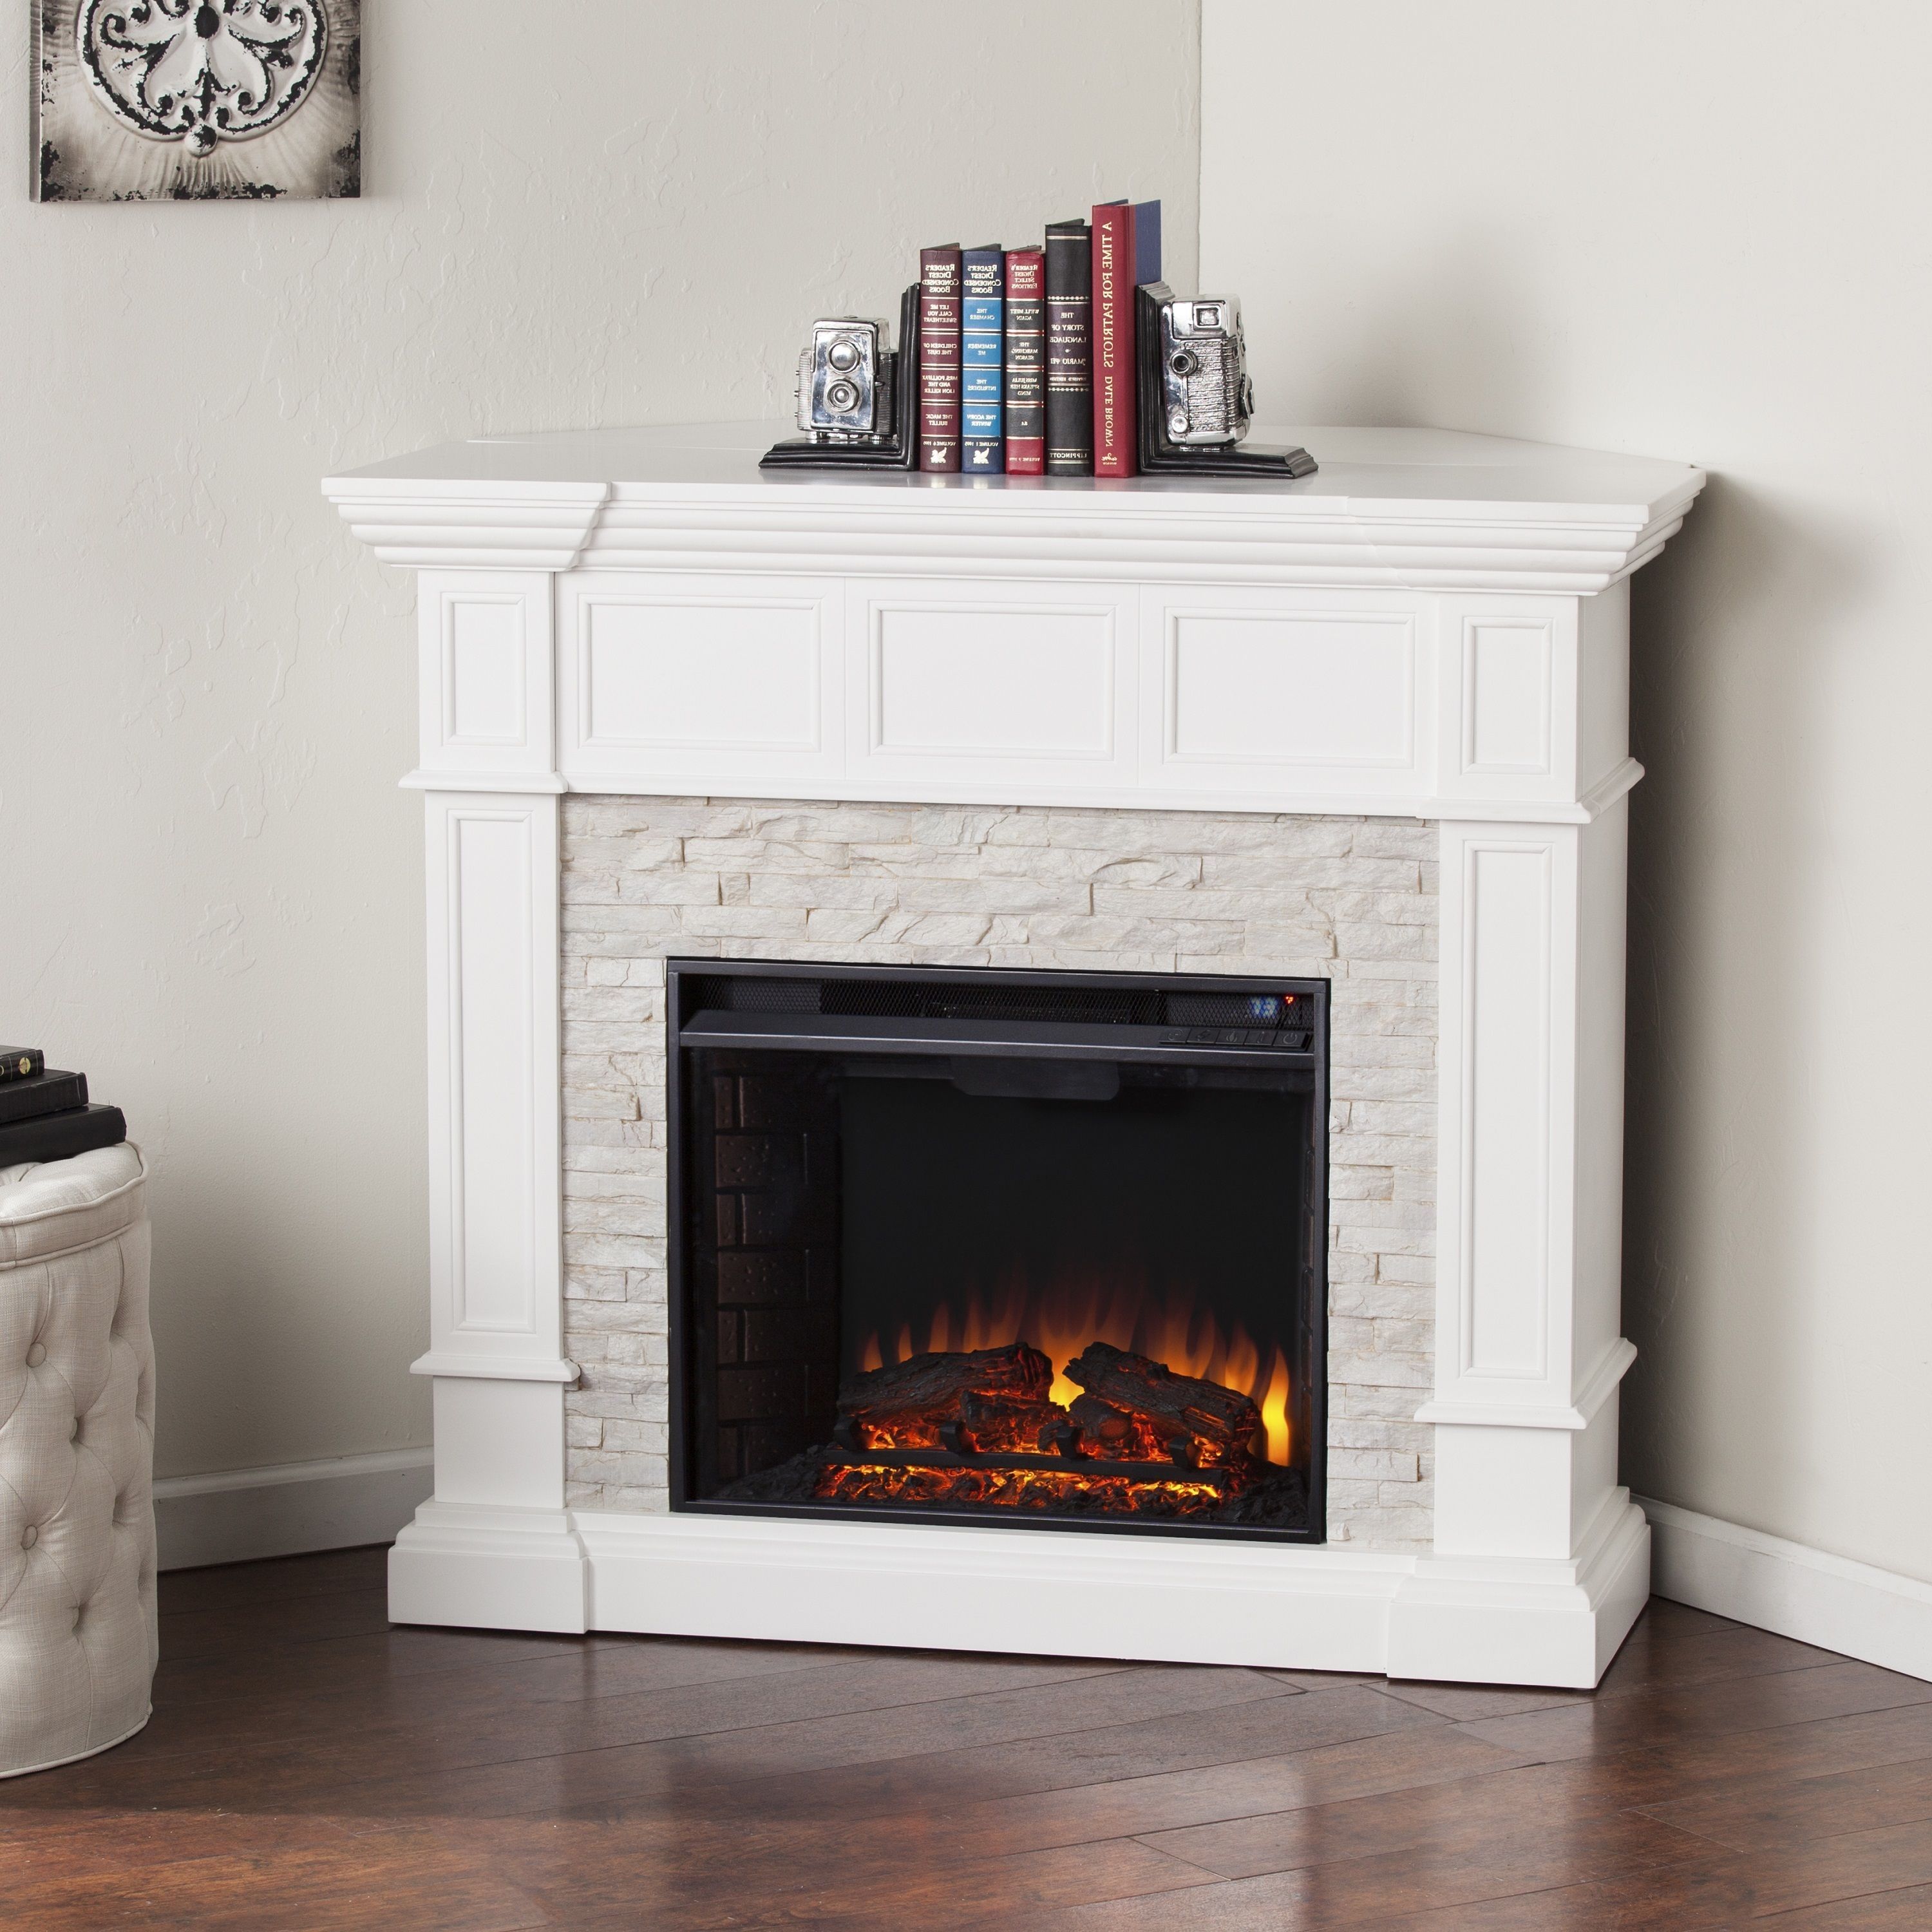 Ivory Electric Fireplace Awesome 33 Modern and Traditional Corner Fireplace Ideas Remodel